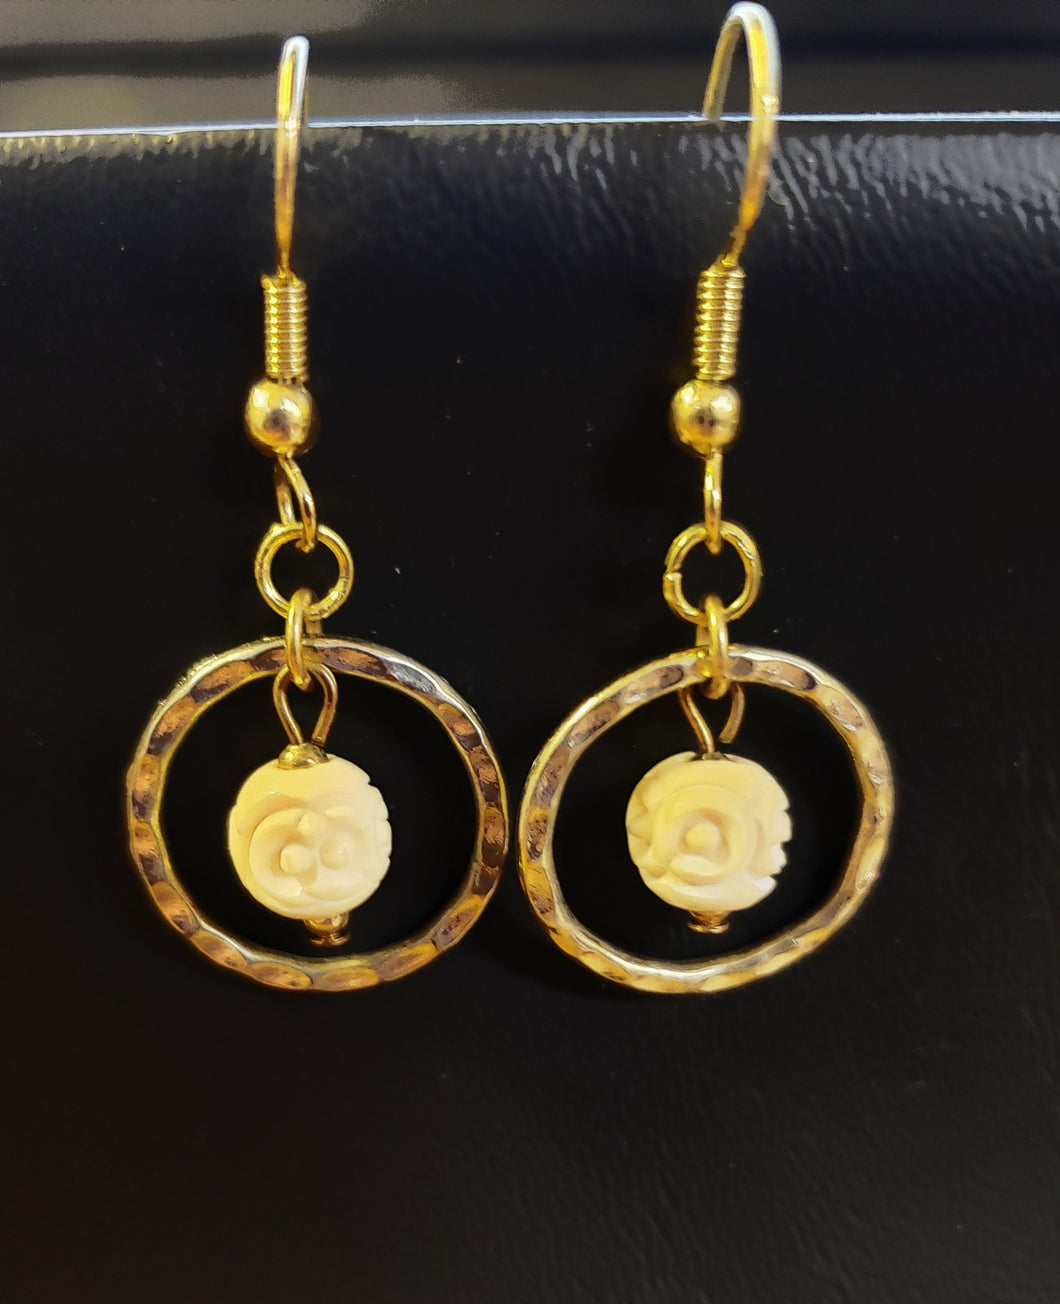 Adorn yourself in the ancient beauty of these Hand Carved Fossil Mammoth Ivory Bead Earrings. 10,000 years old with a design inspired by 13th century China.